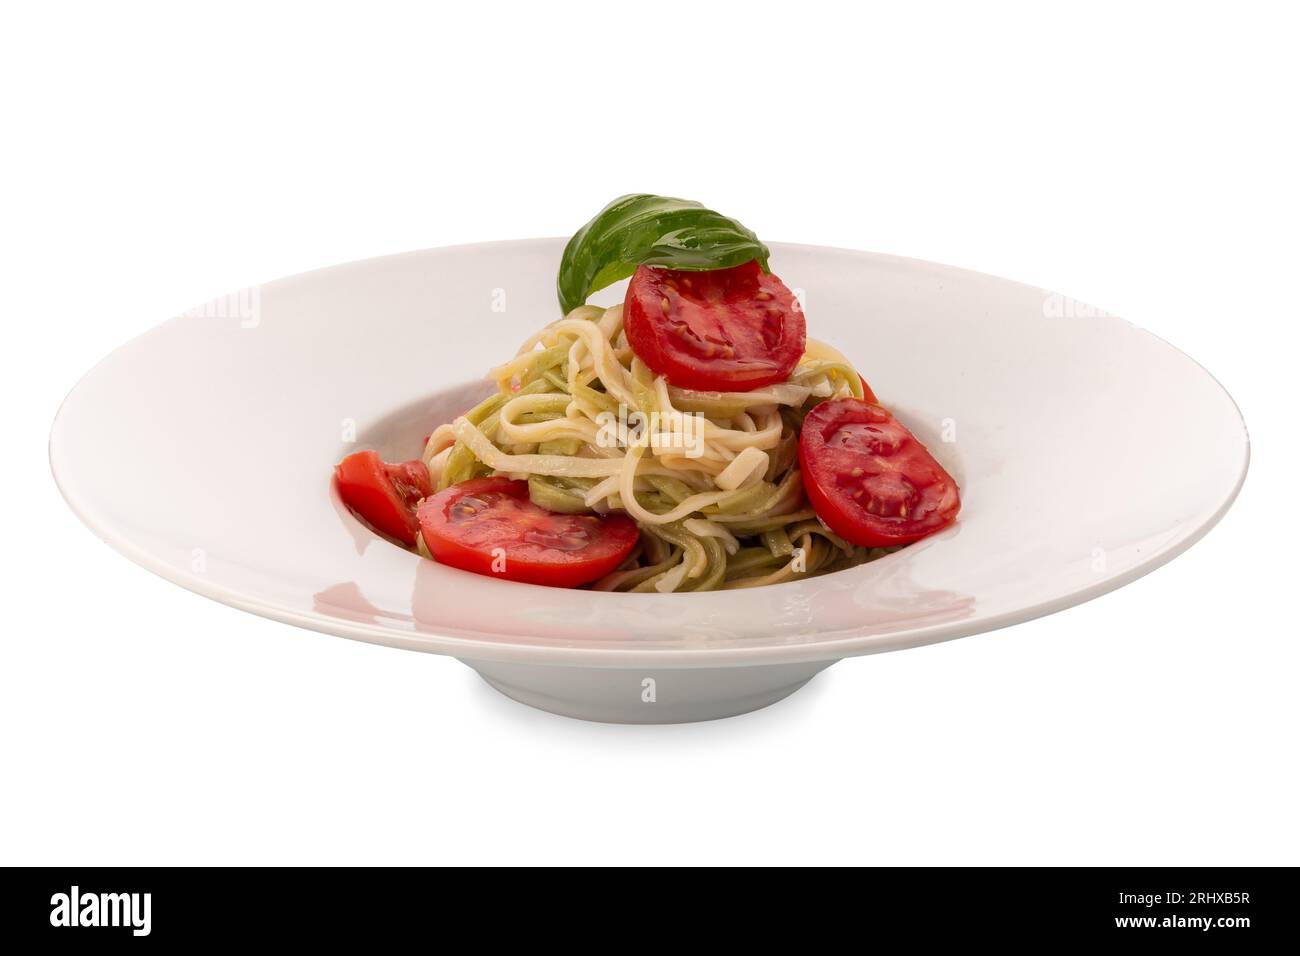 Linguine of two types, white and green, with fresh tomato slices, basil leaves and olive oil in a dish isolated on white with clipping path Stock Photo